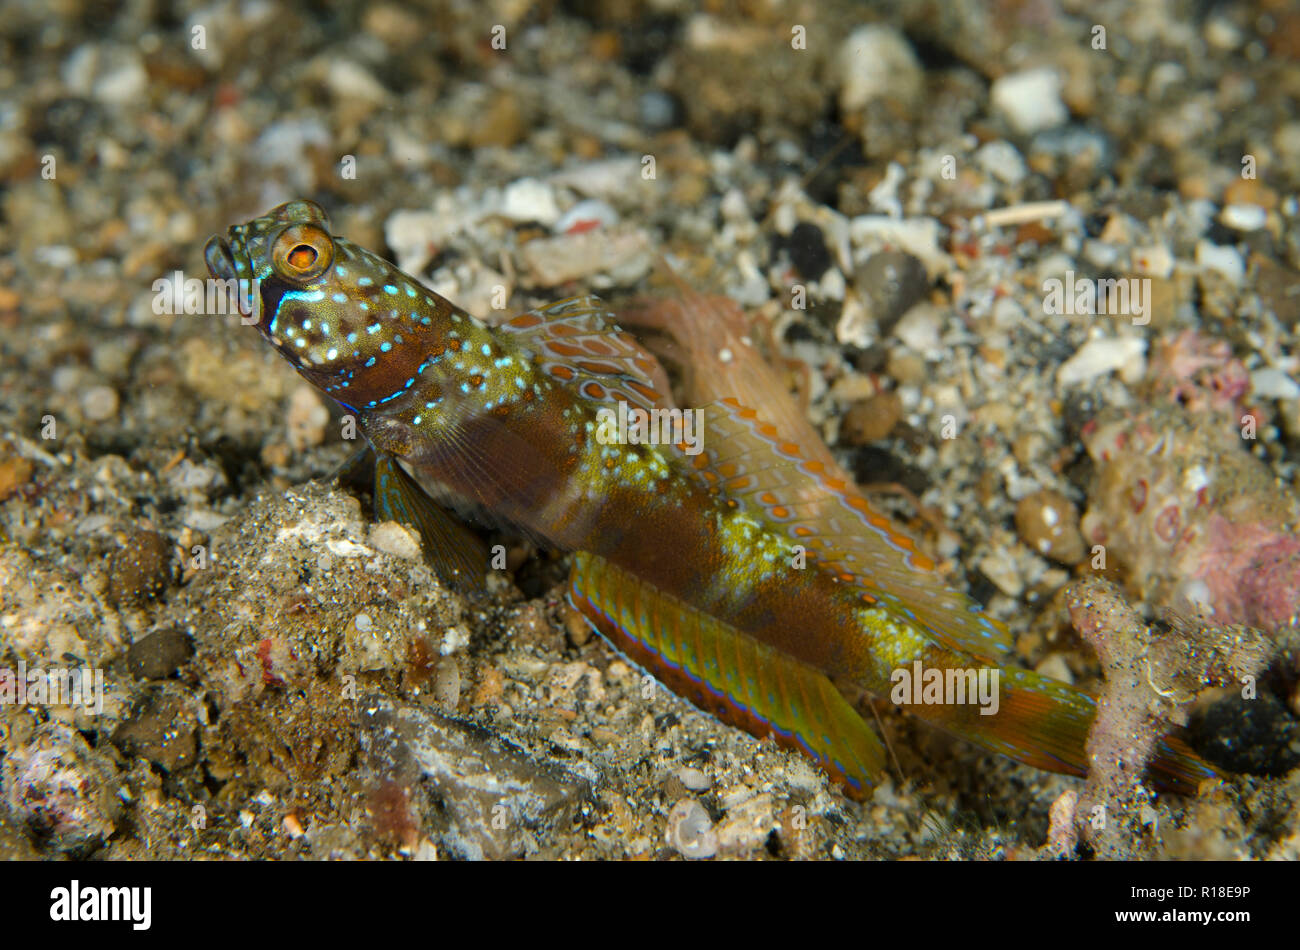 Wide-barred Goby, Amblyeleotris latifasciata, with fin extended and Snapping Shrimp (Alpheus sp), Serena Besar dive site, Lembeh Straits, Indonesia Stock Photo